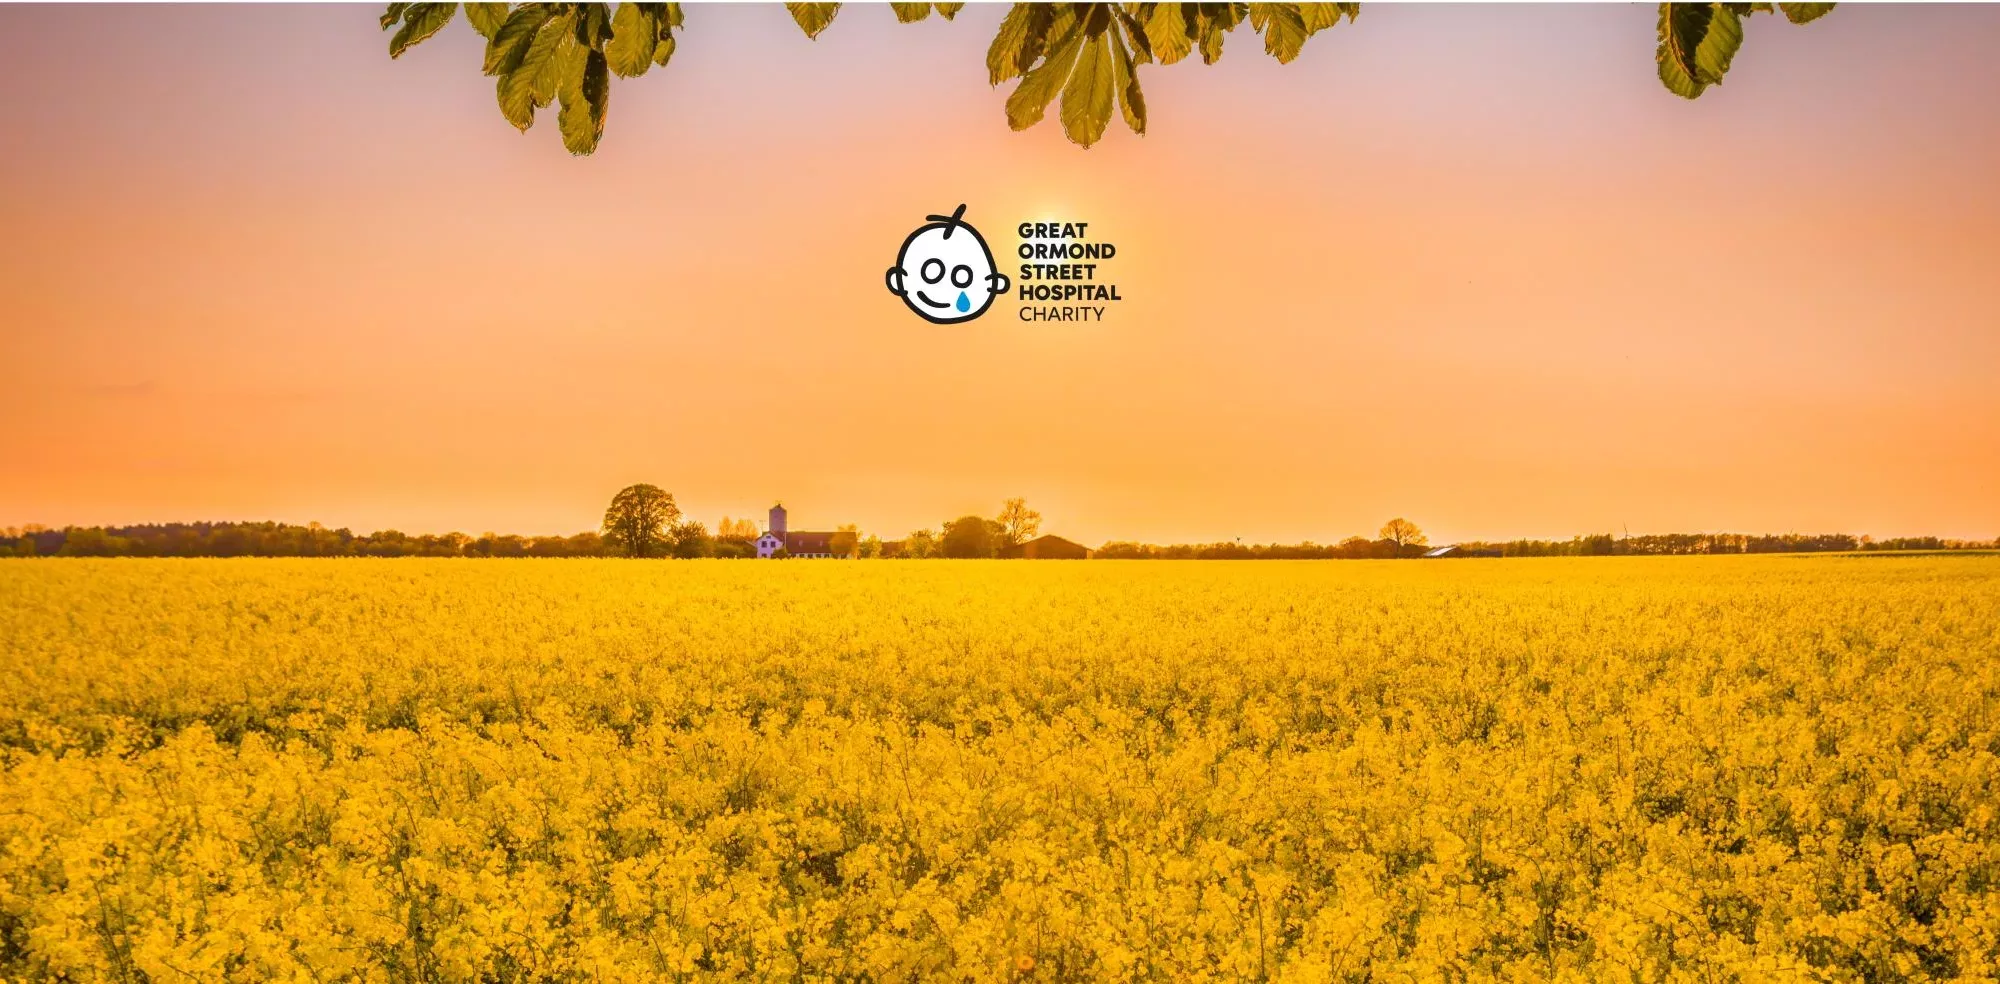 Charities - The Great Ormond Street Hospital (GOSH) Logo Displayed Over An Image Of A Field Of Yellow Flowers At Sunset